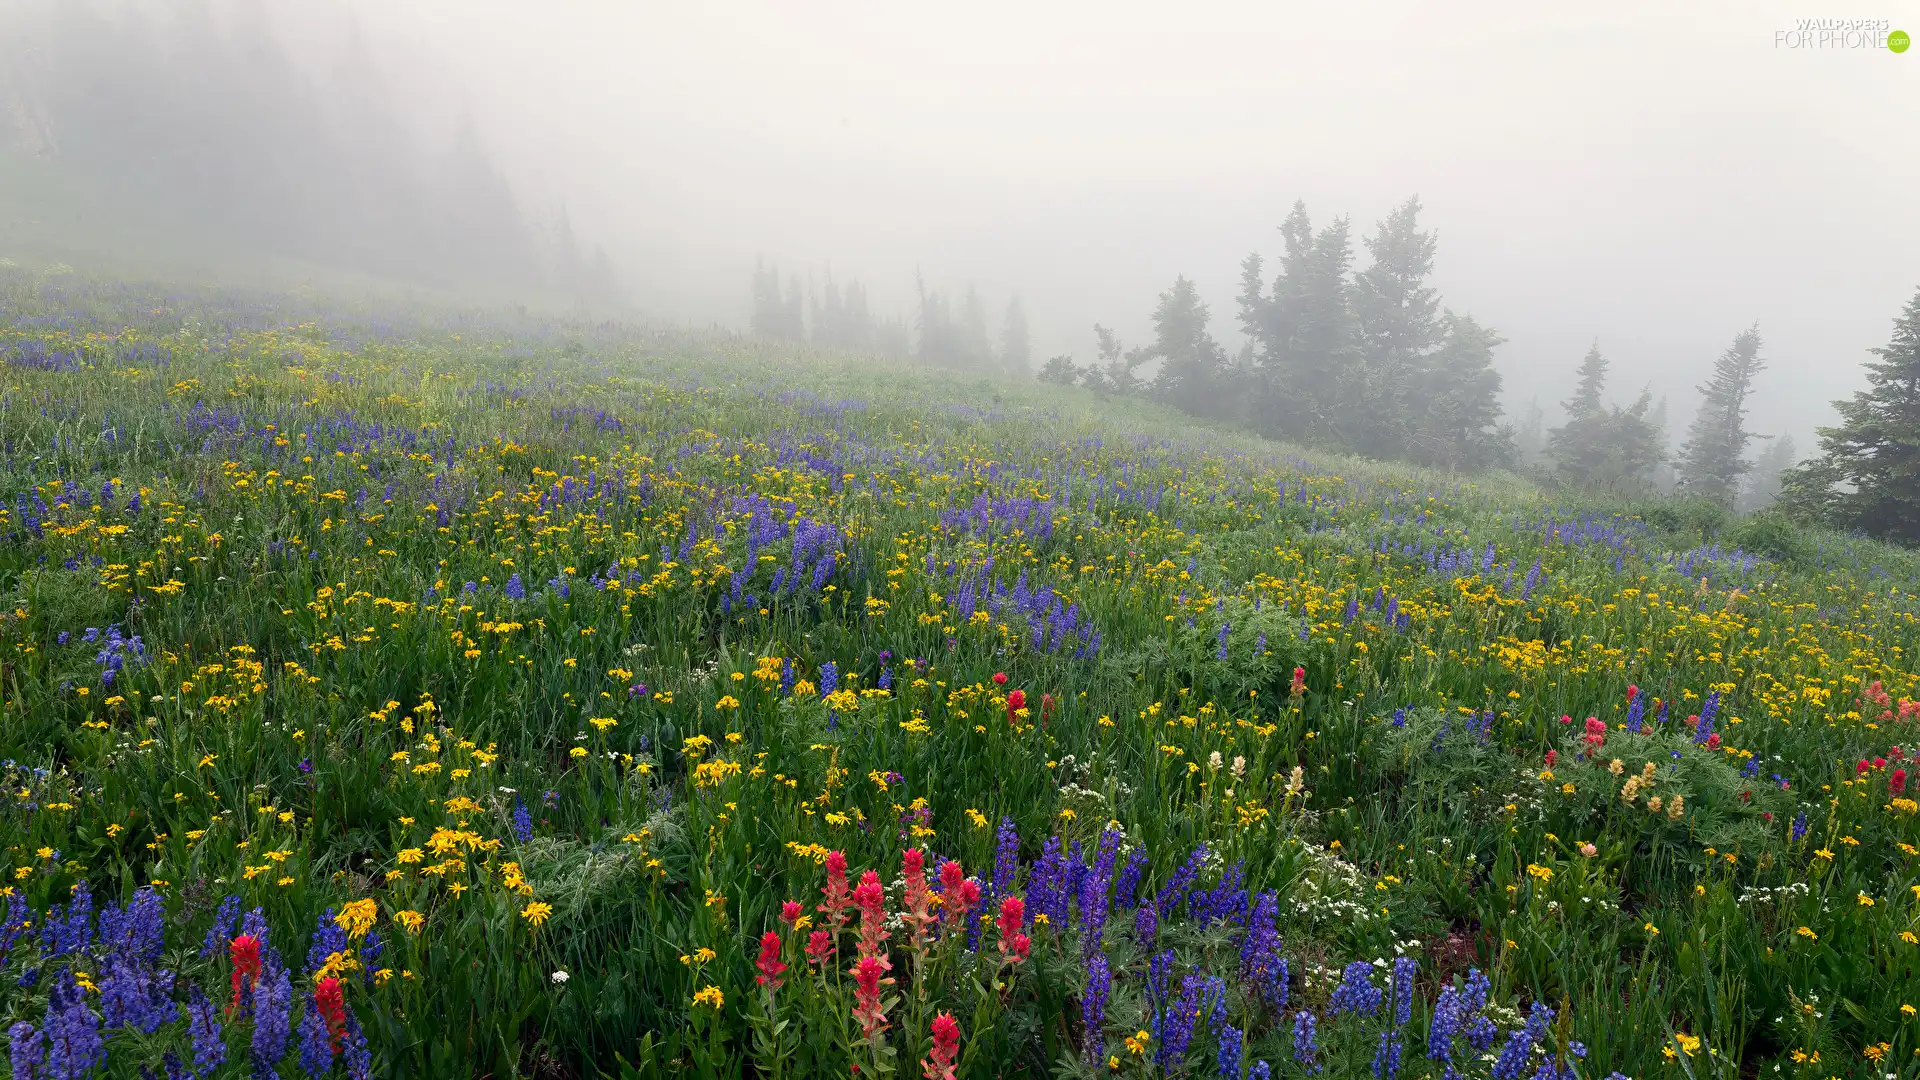 Hill, Flowers, trees, lupine, Meadow, Fog, viewes